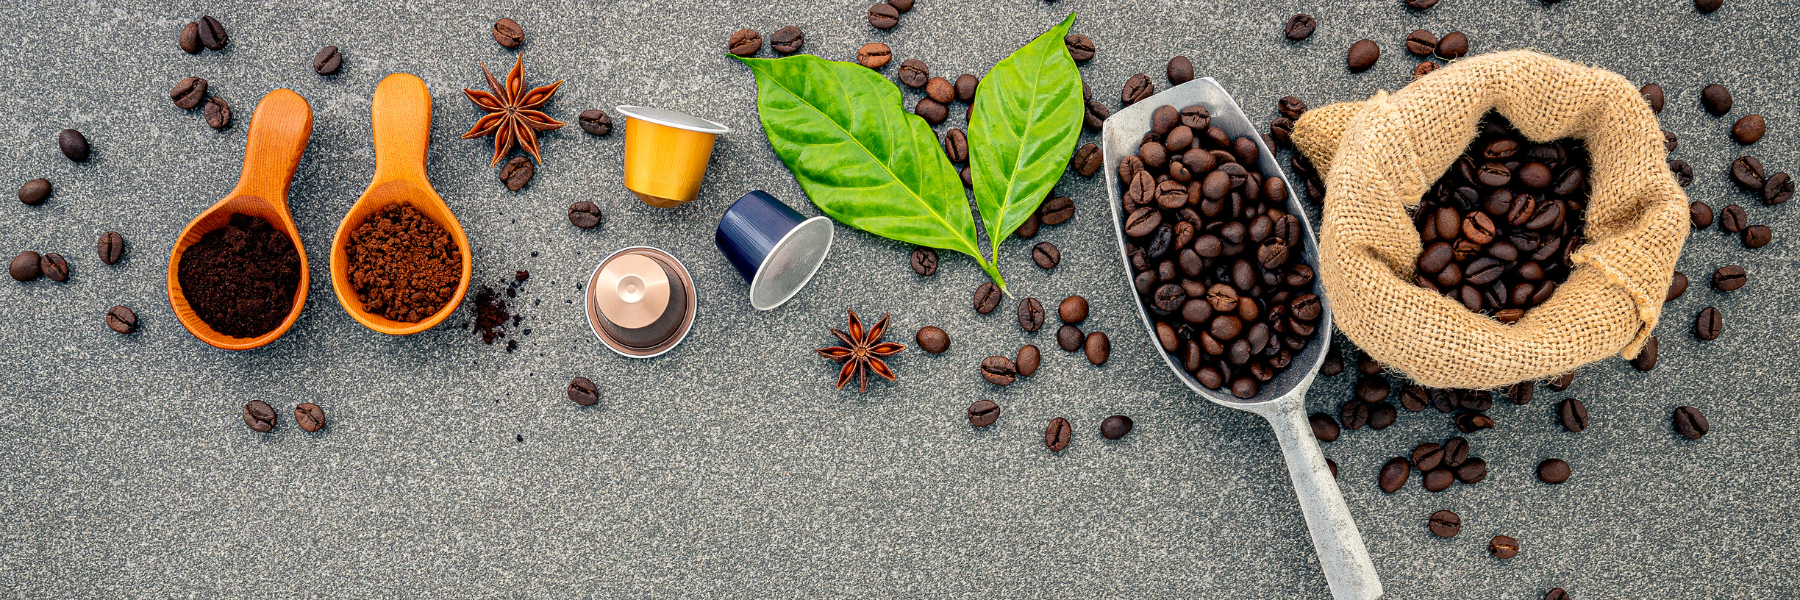 How to Recycle Coffee Pods